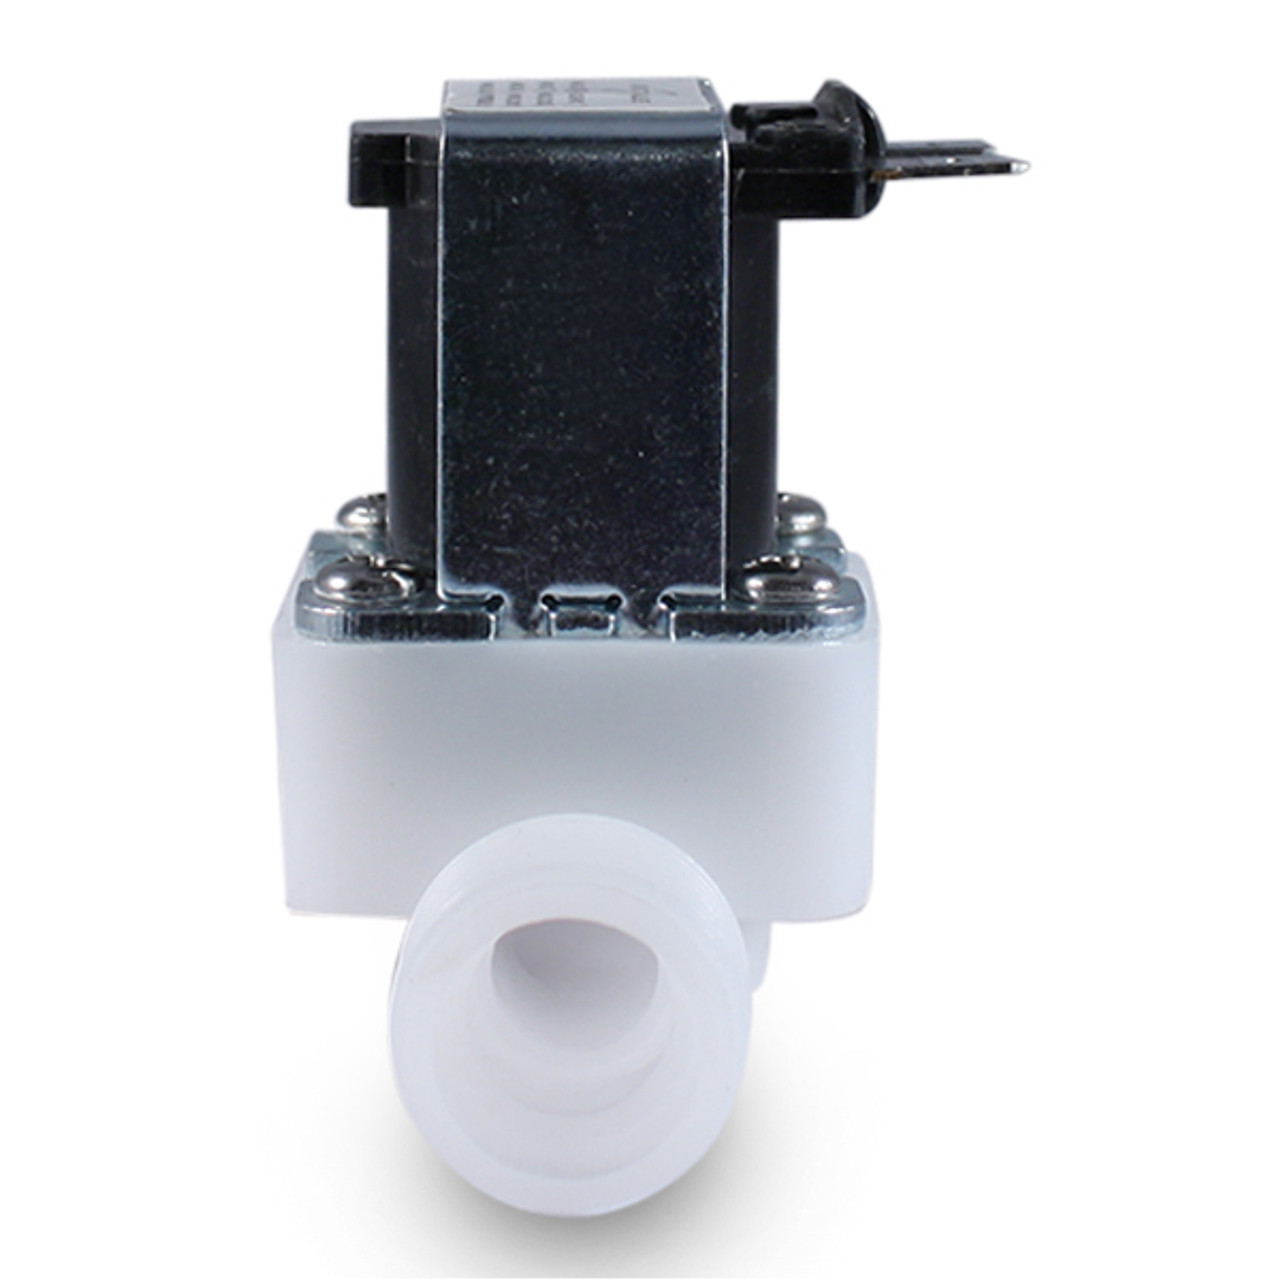 Solenoid Valve 12V DC 12V G1/2 NC Plastic Electromagnetic Valve Normally Closed Anti-corrosion Water Inlet Switch Solenoid Valve for Water Dispense